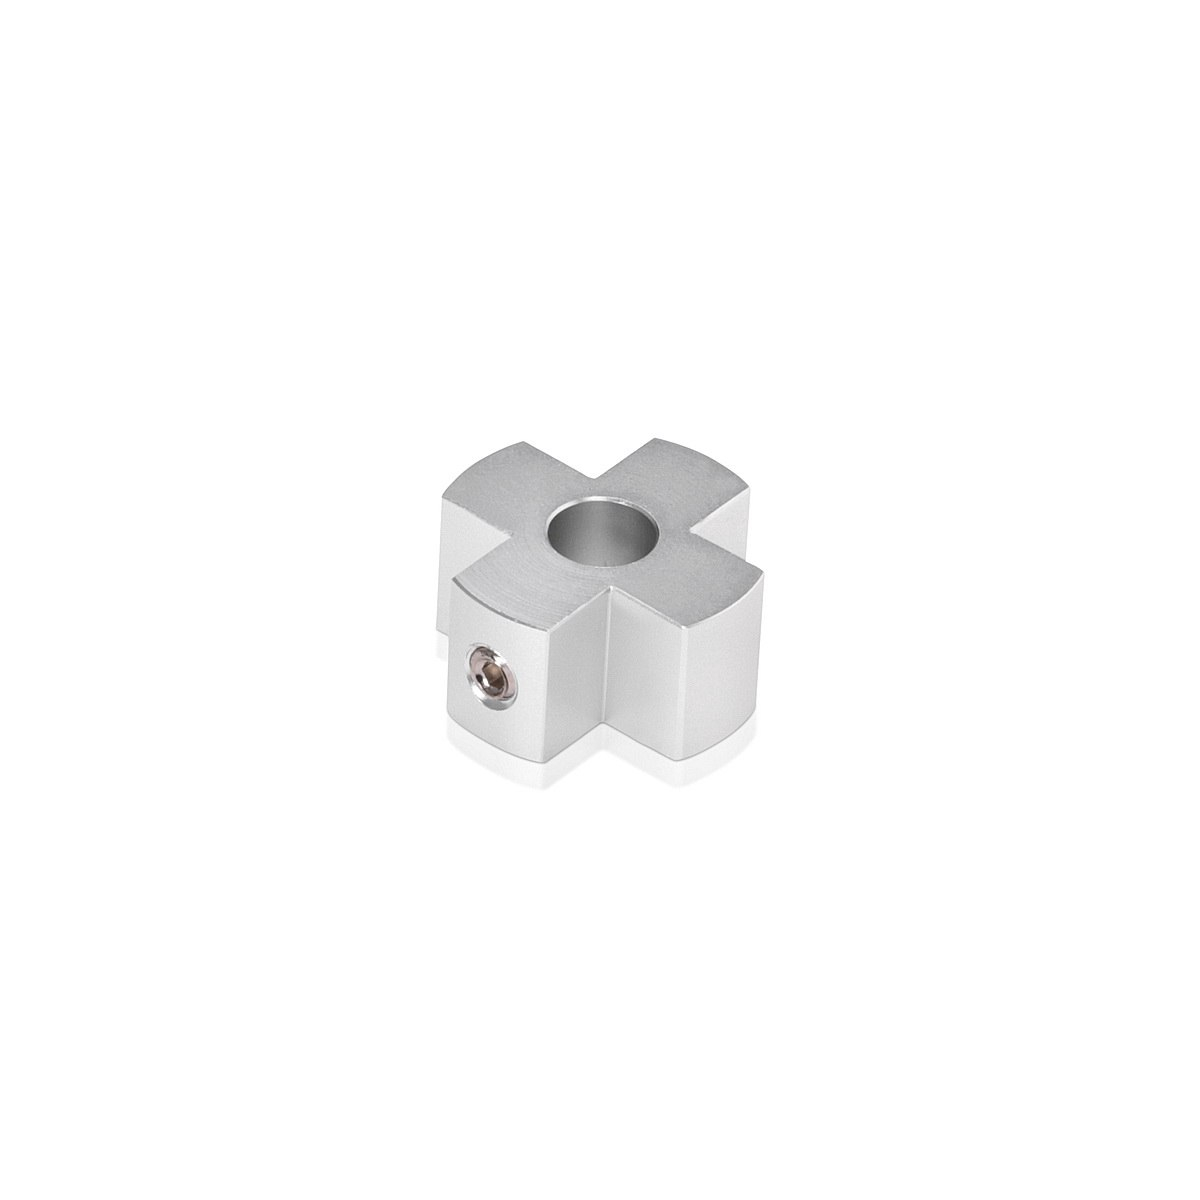 4-Way Standoffs Hub, Diameter: 1'', Thickness: 1/2'', Clear Anodized Aluminum [Required Material Hole Size: 7/16'']